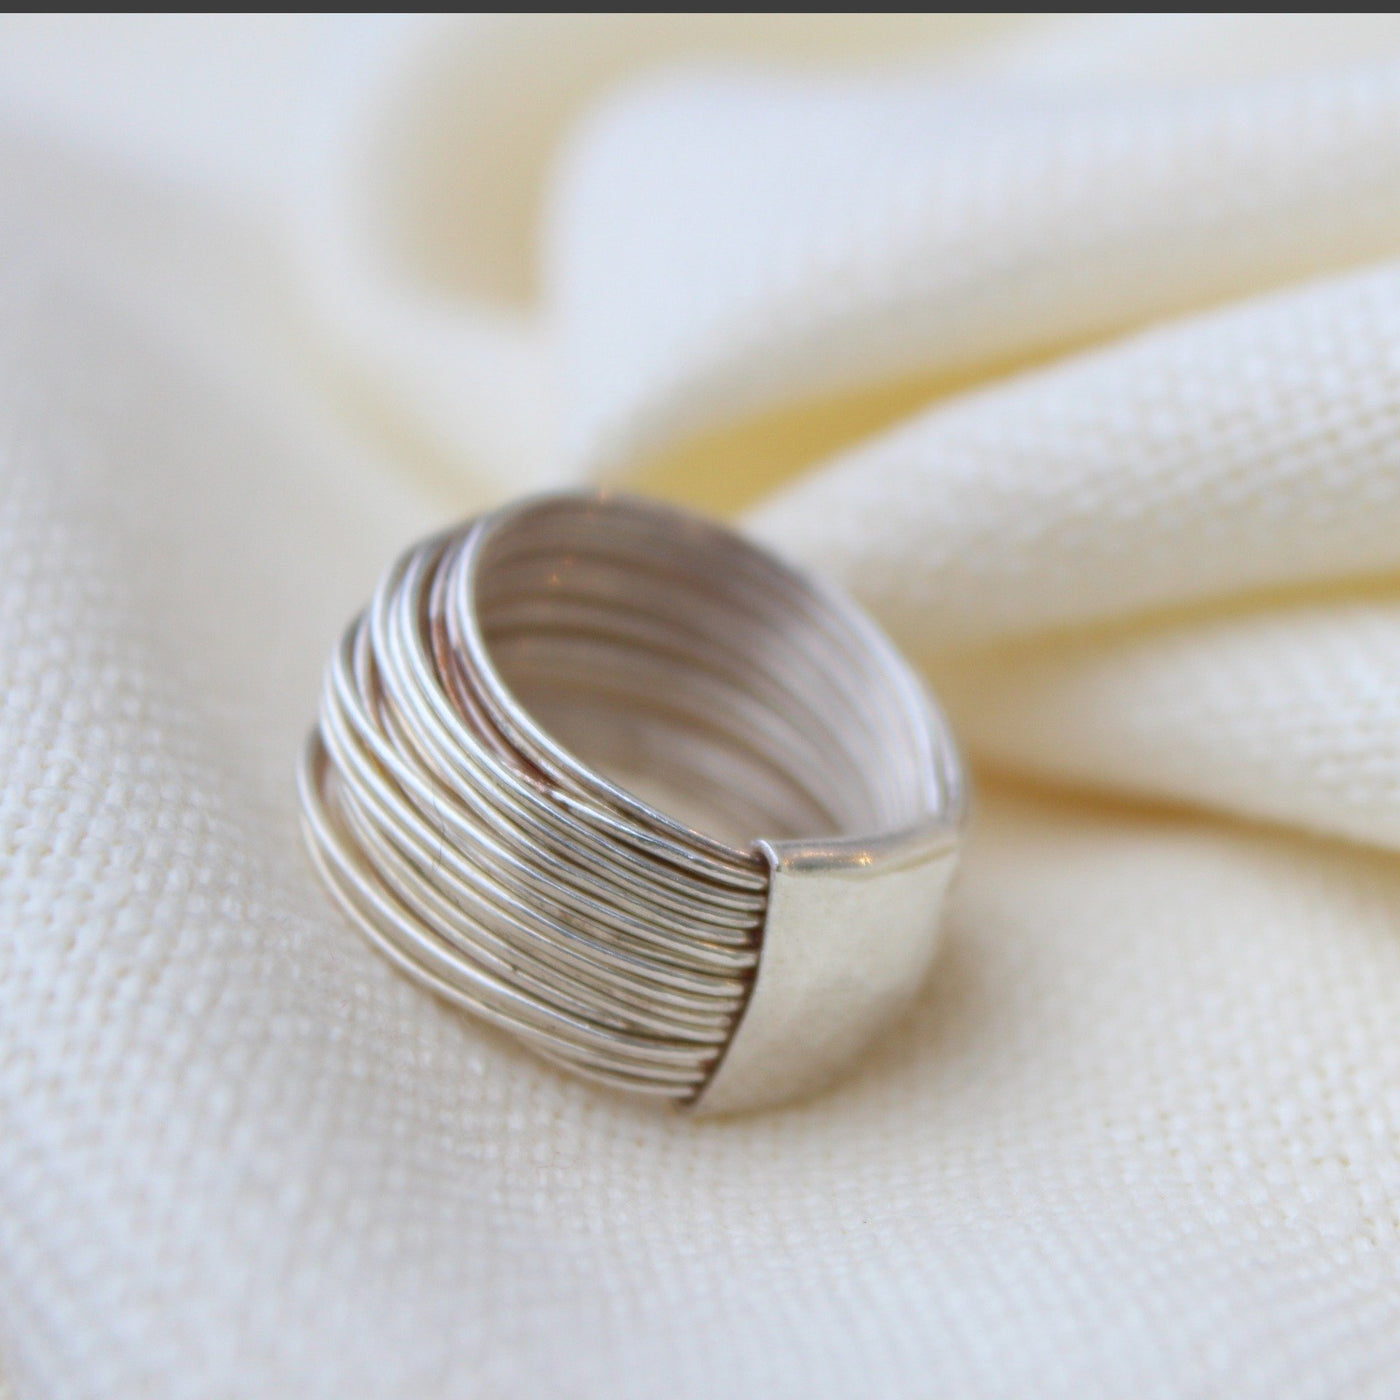 Wrap Ring in Silver - Maral Kunst Jewelry